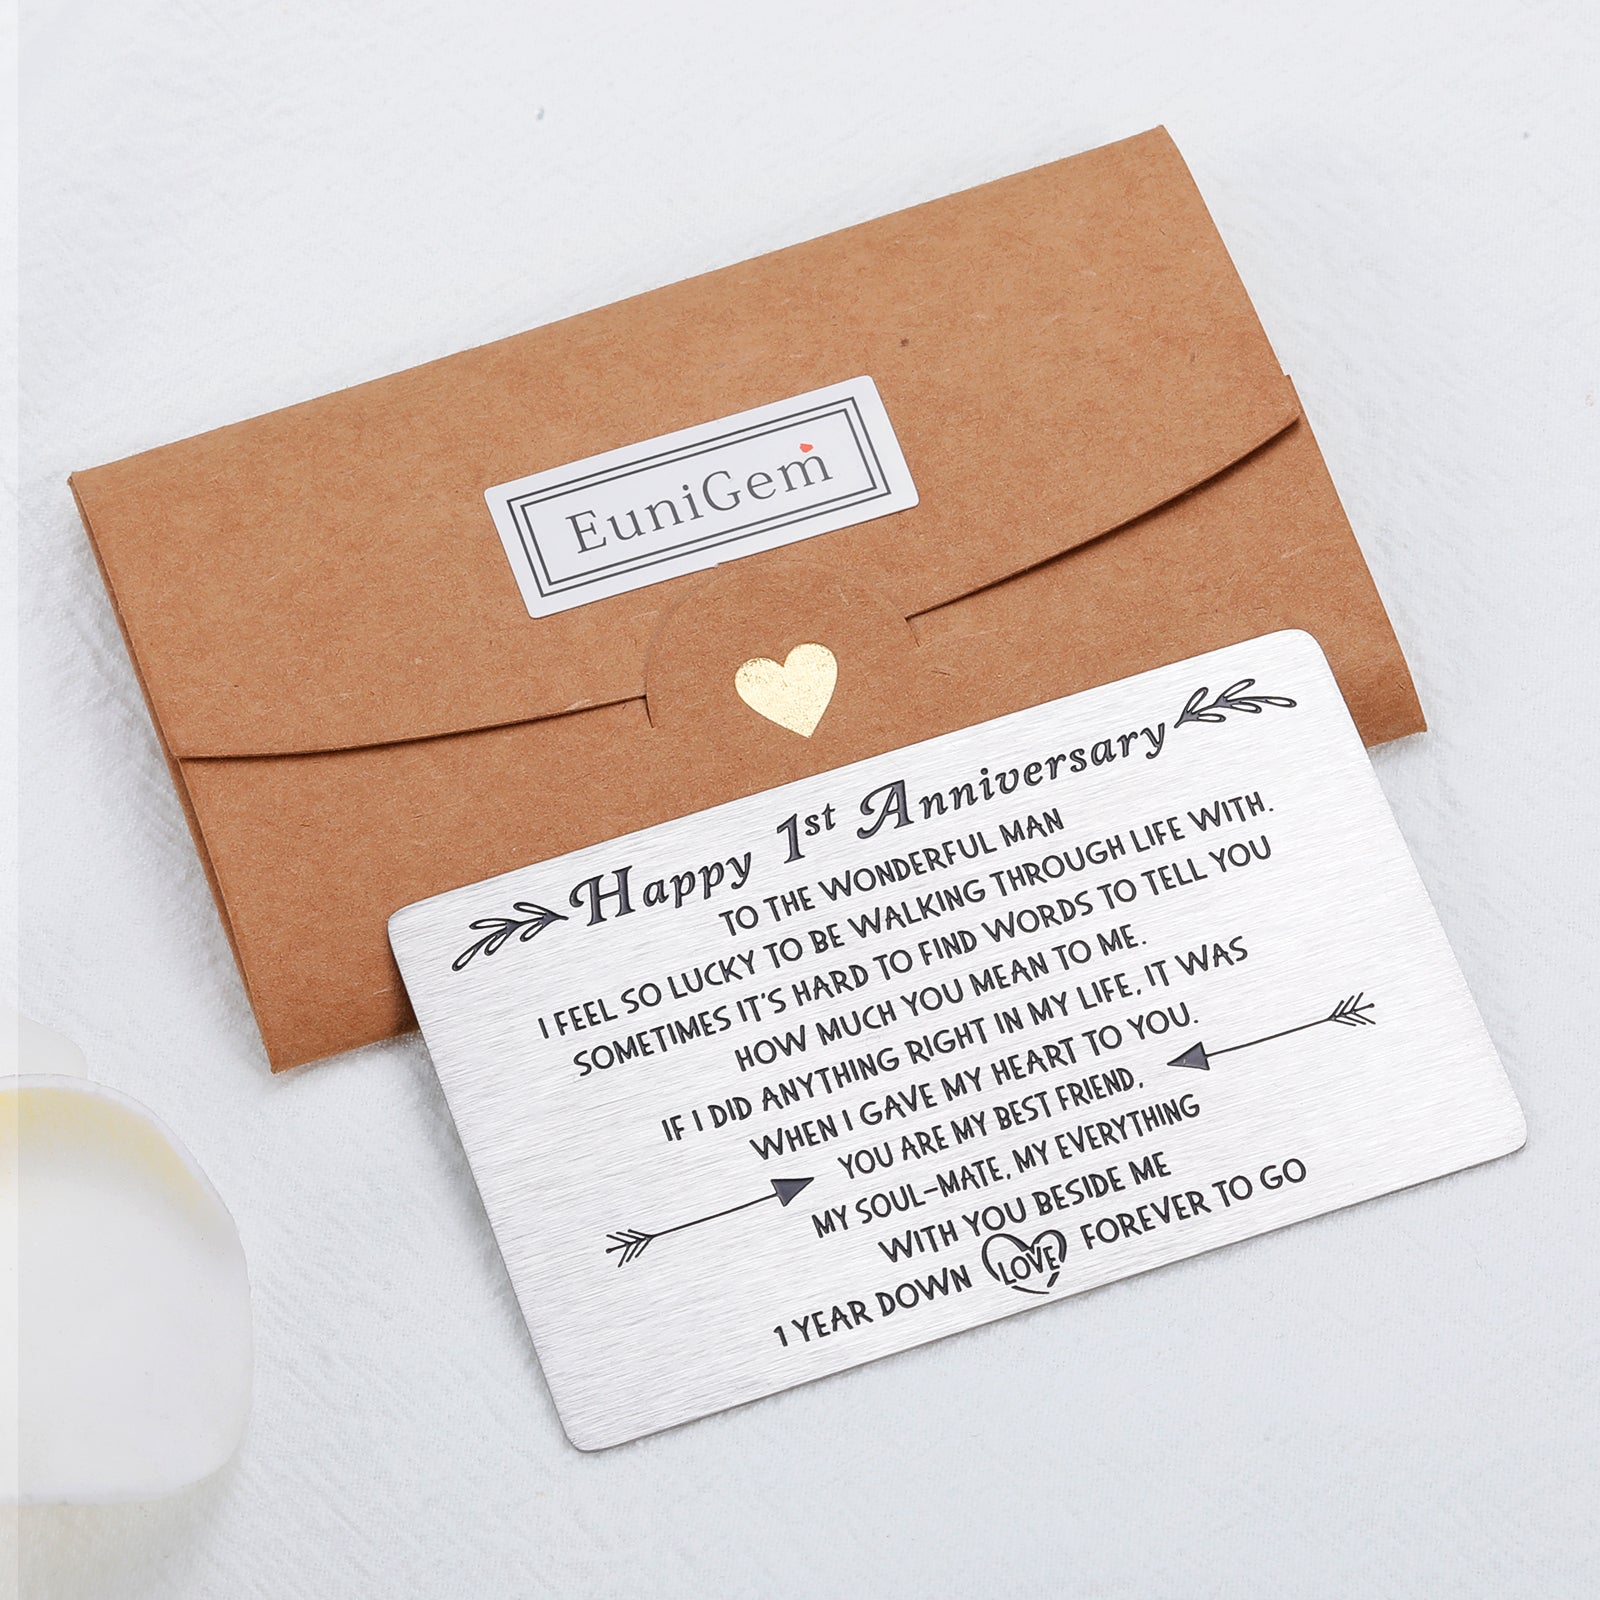 Eunigem Happy 1st Anniversary Card Gifts for Men, First India | Ubuy